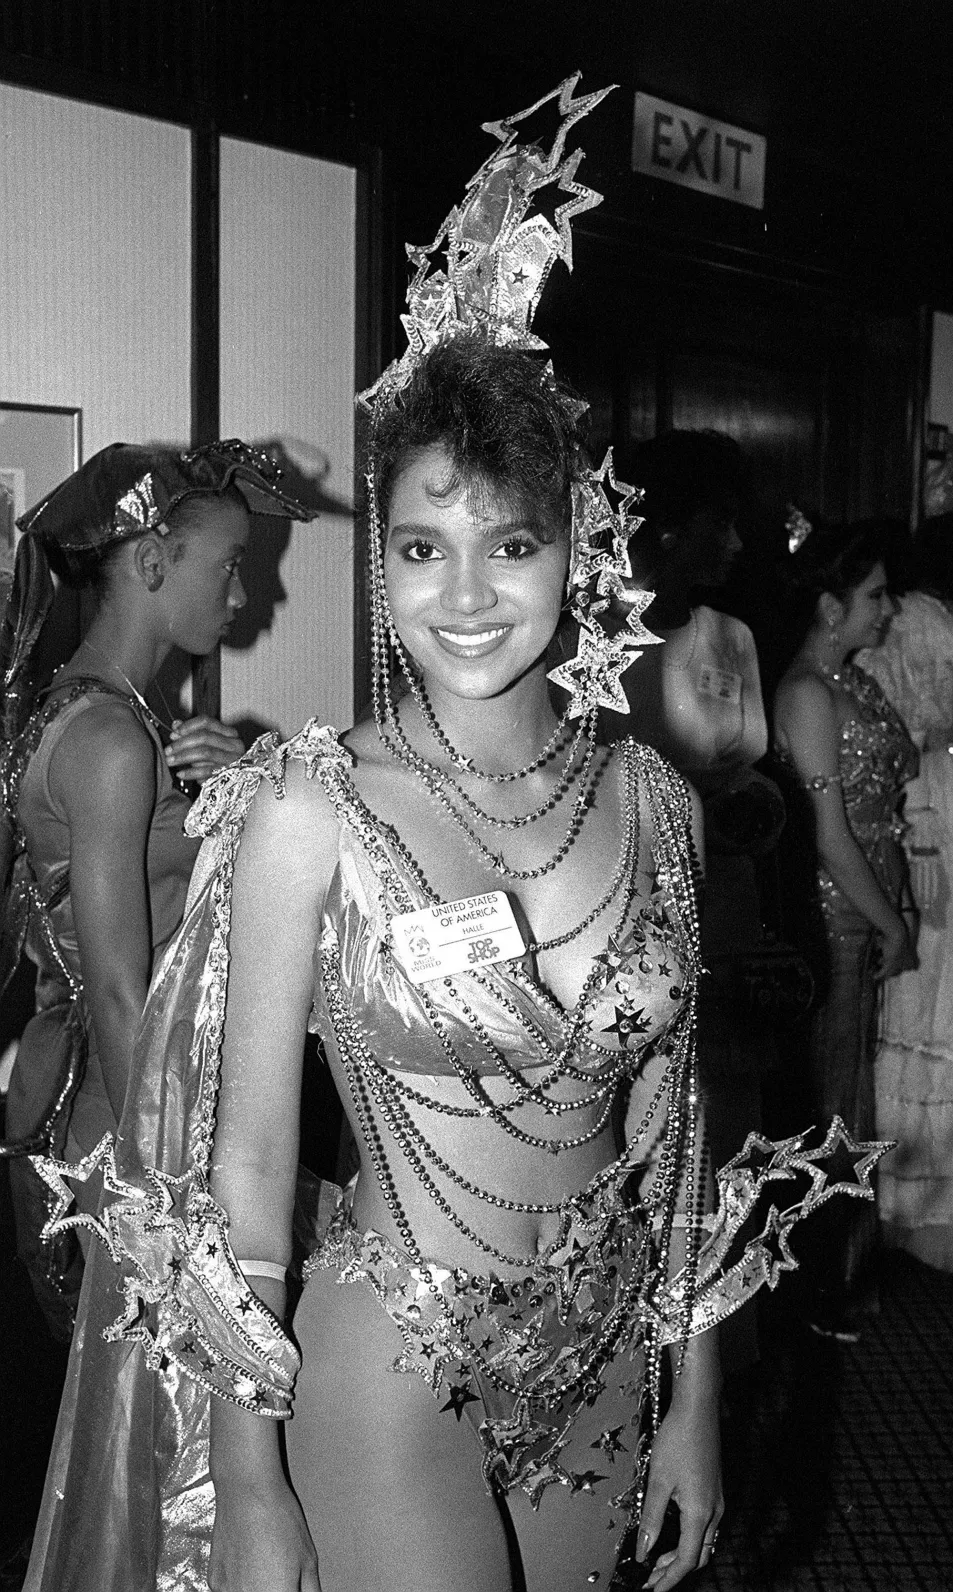 Halle Berry taking part in the Miss World 1986 contest